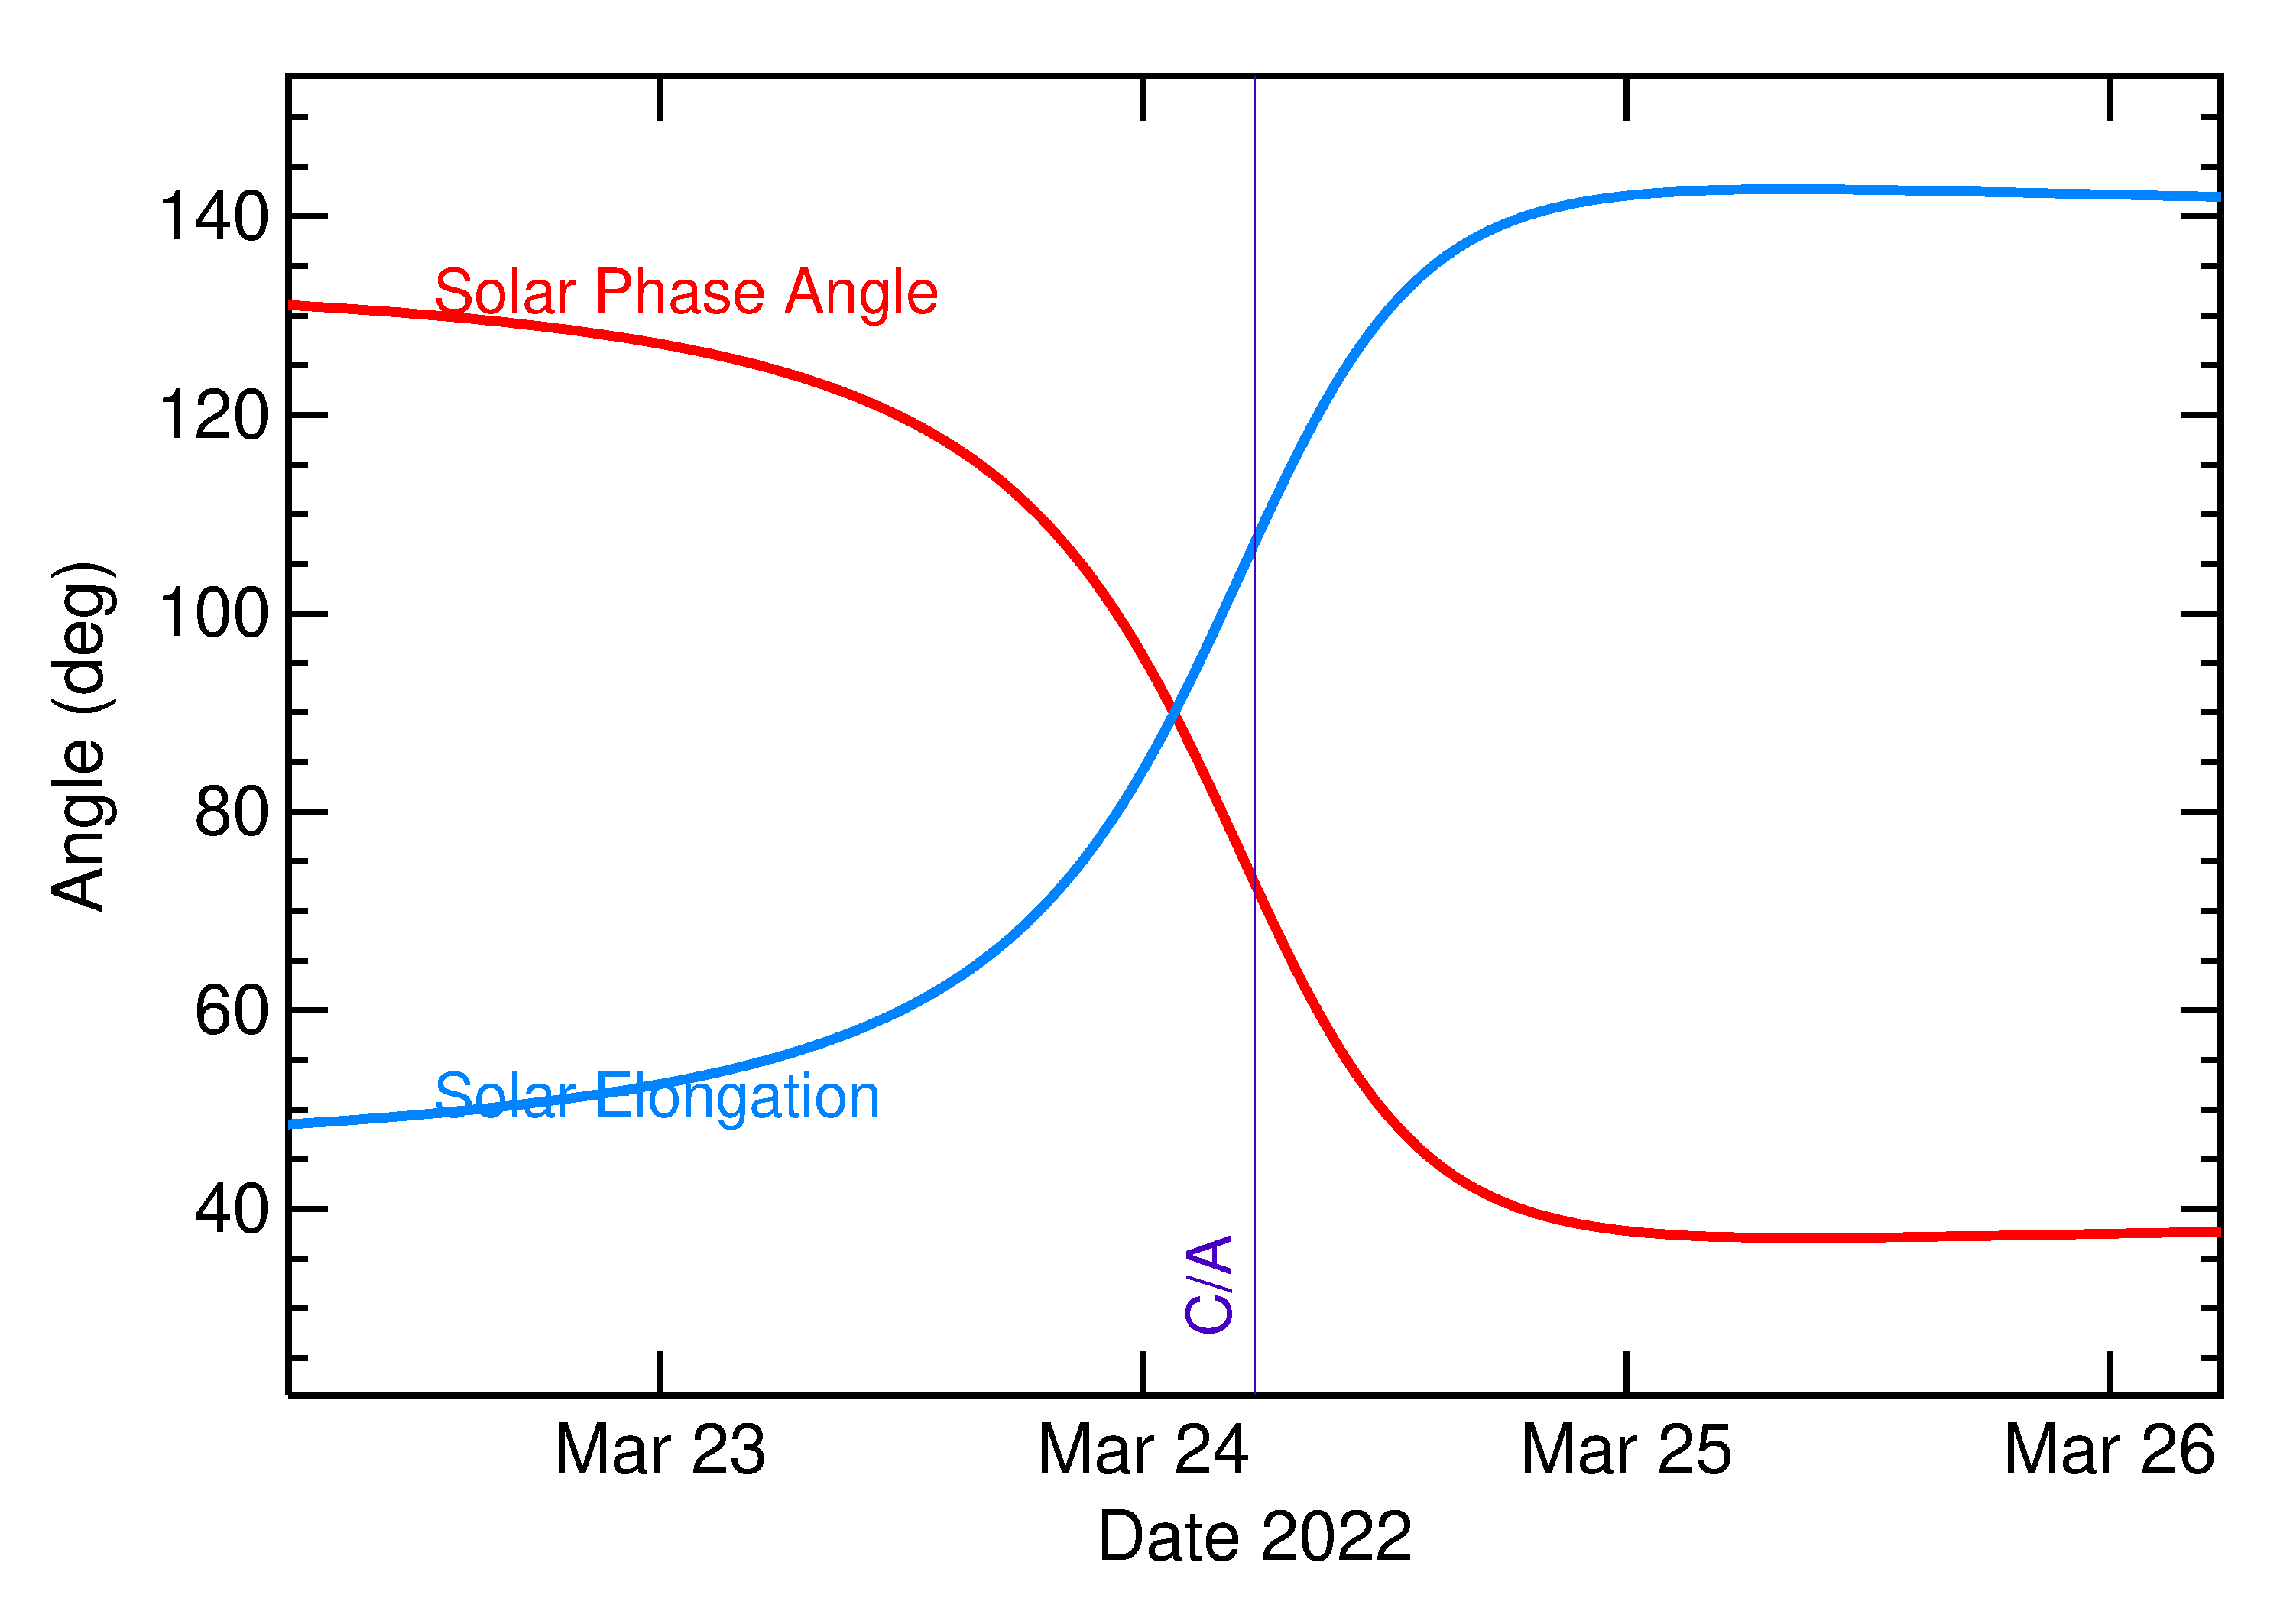 Solar Elongation and Solar Phase Angle of 2022 FZ3 in the days around closest approach